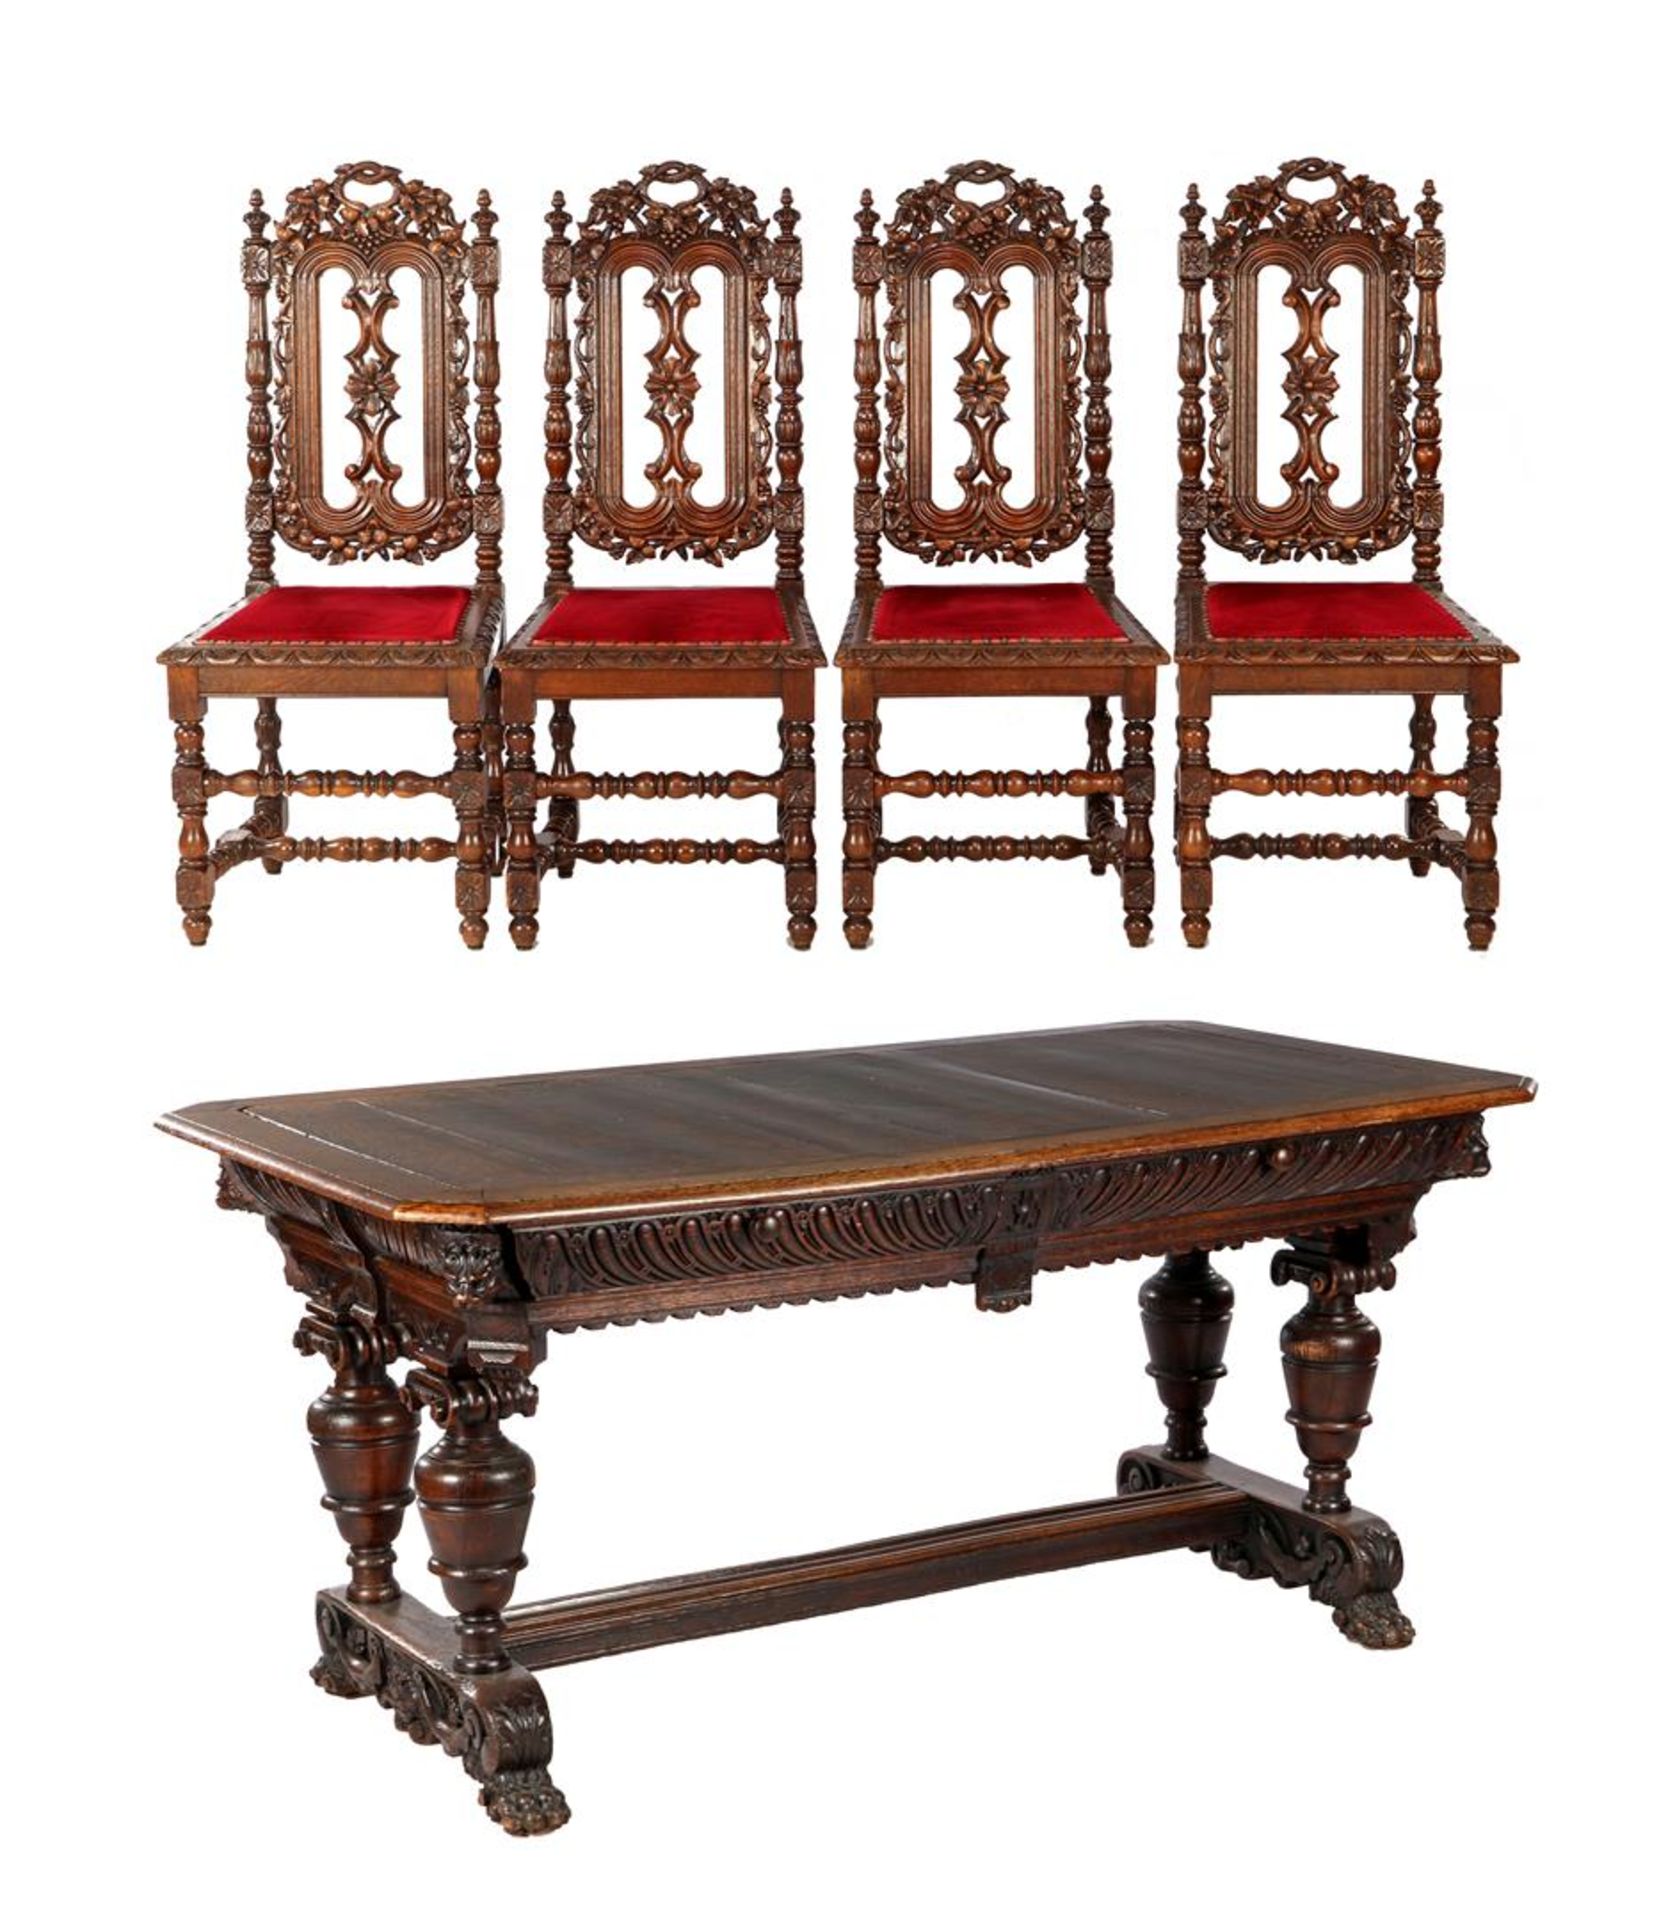 Oak Mechelen richly decorated table with lion masks 